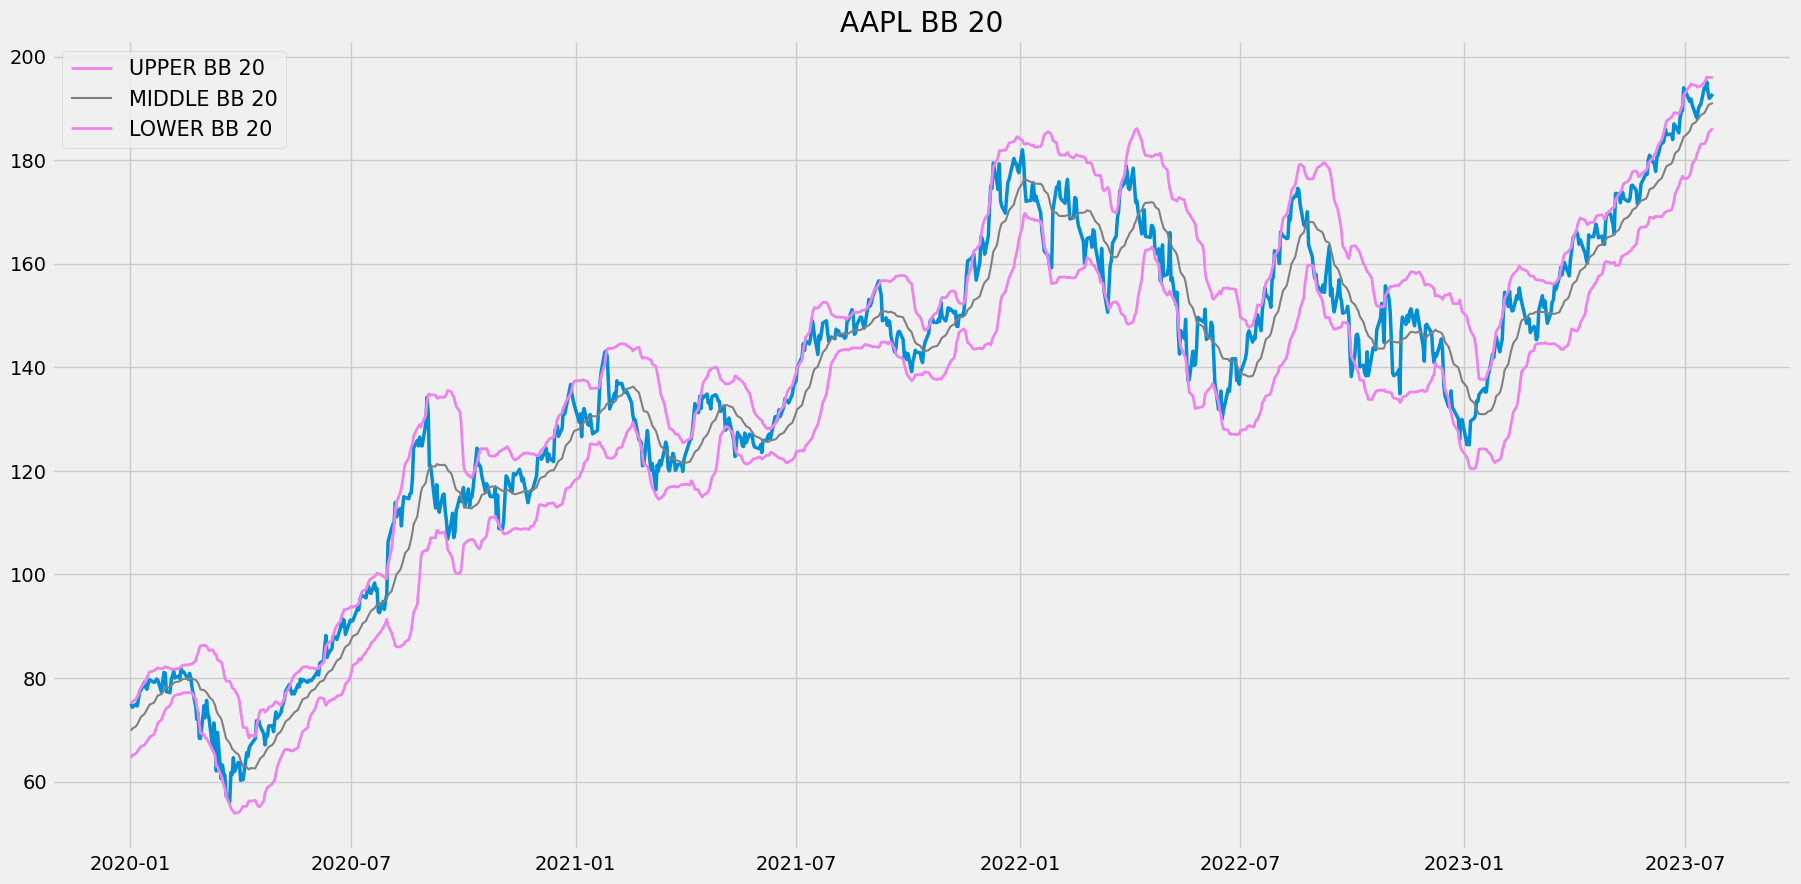 A graph of Apple's Bollinger Bands from 2020 to 2023 